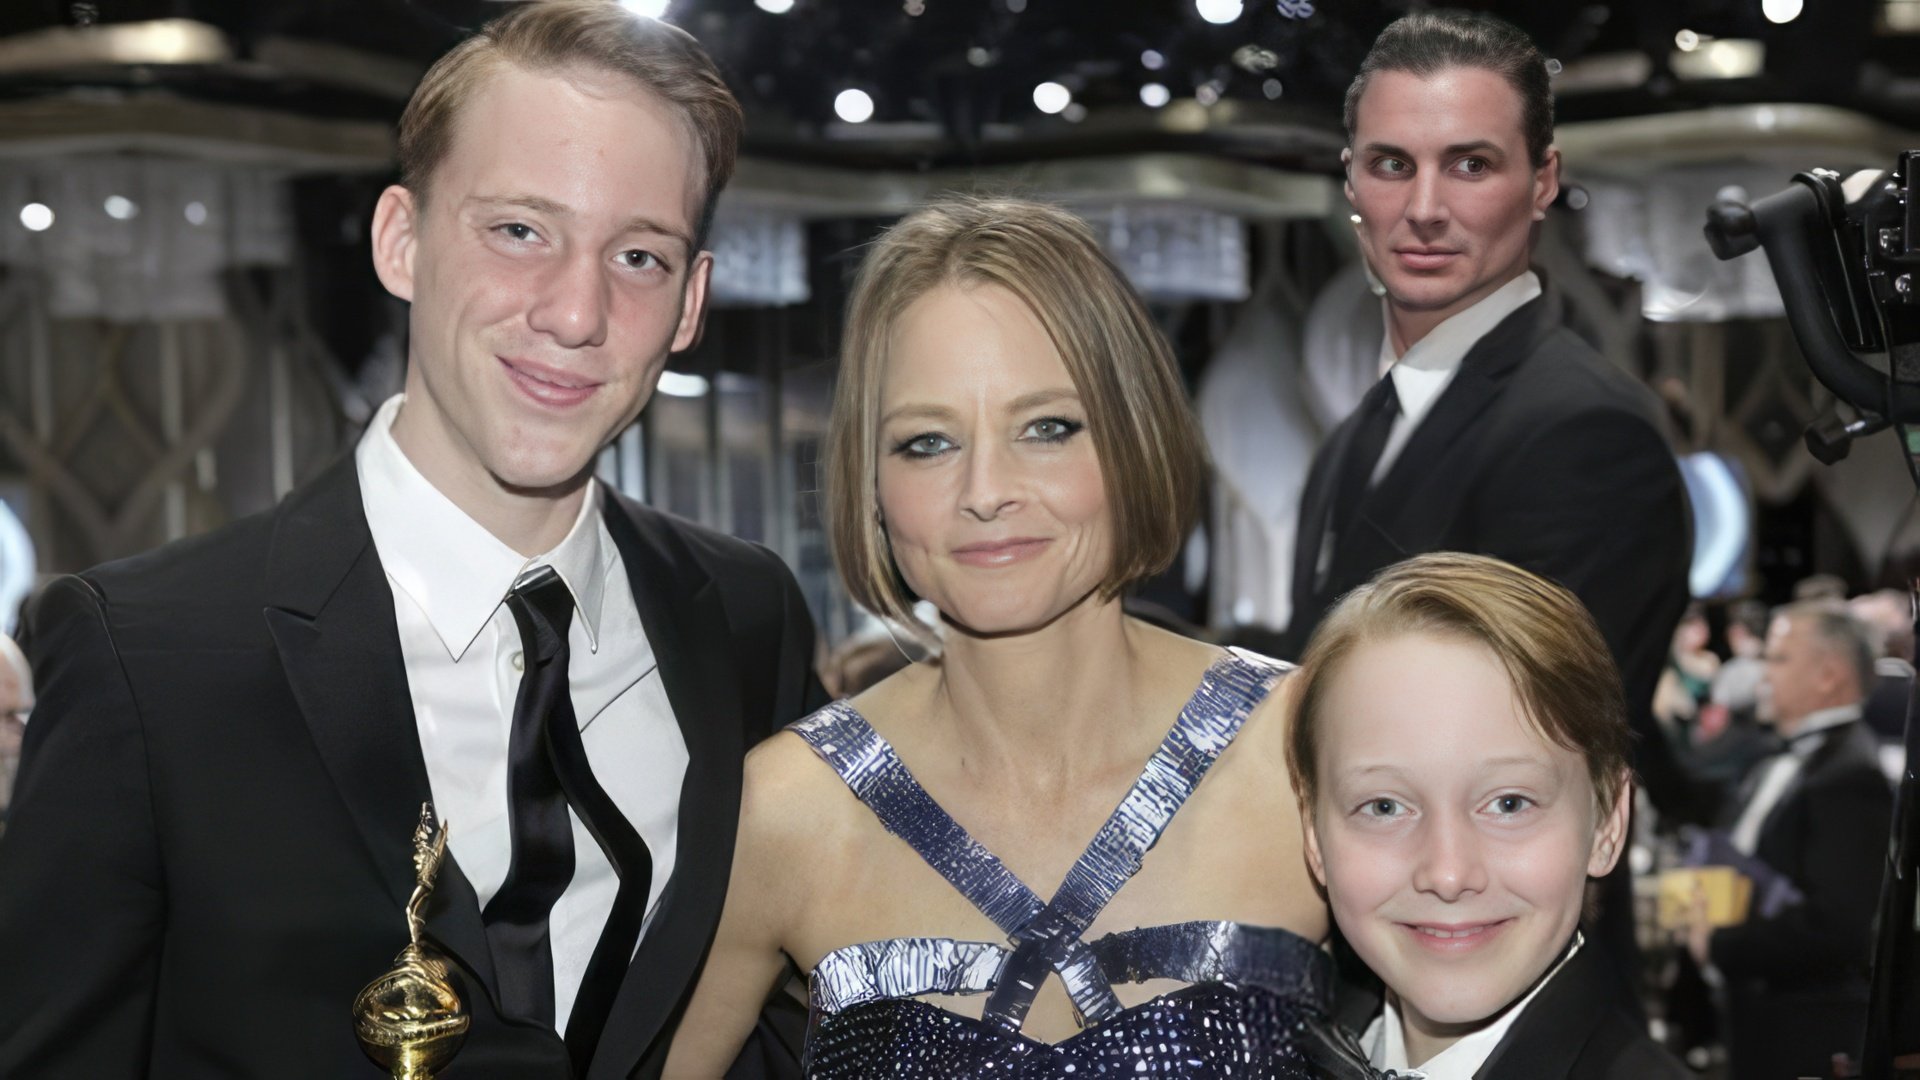 Jodie Foster with her sons